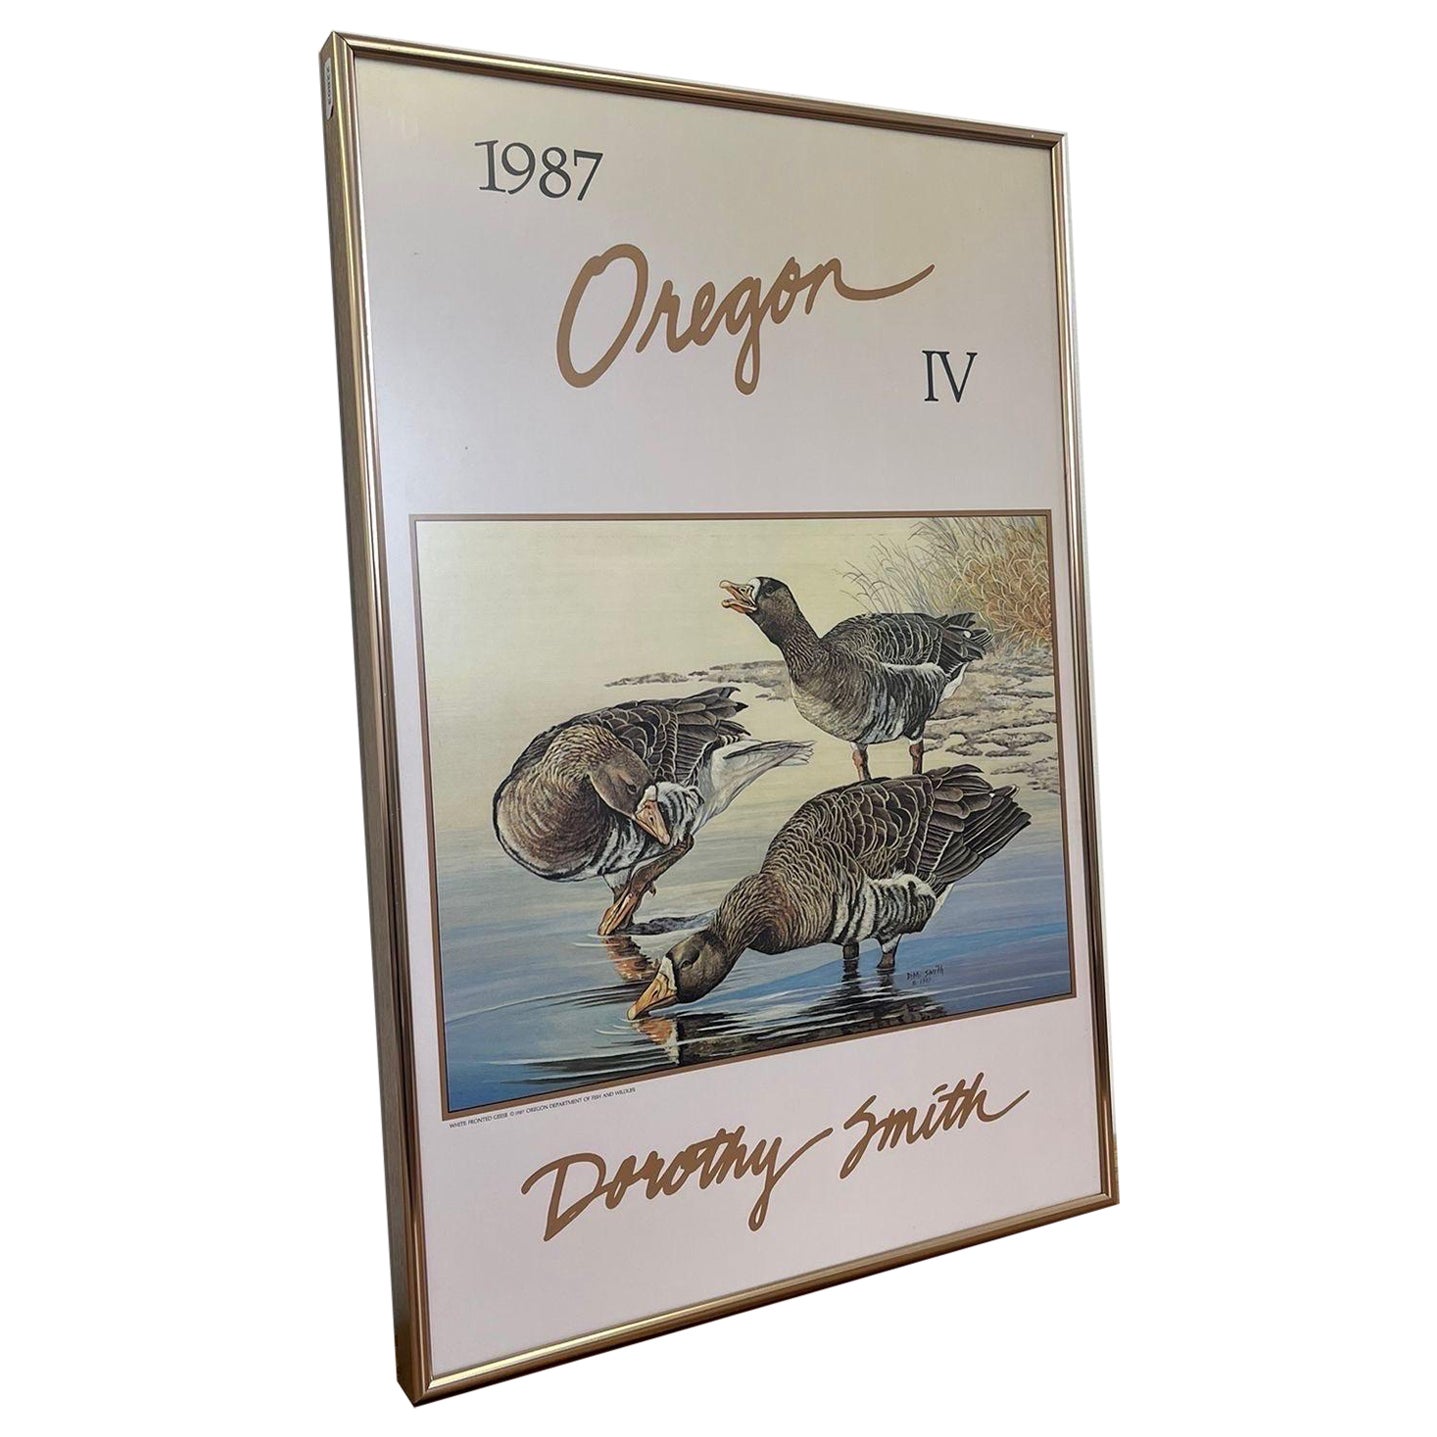 Vintage Oregon Waterfowl Print by Dorathy Smith. For Sale